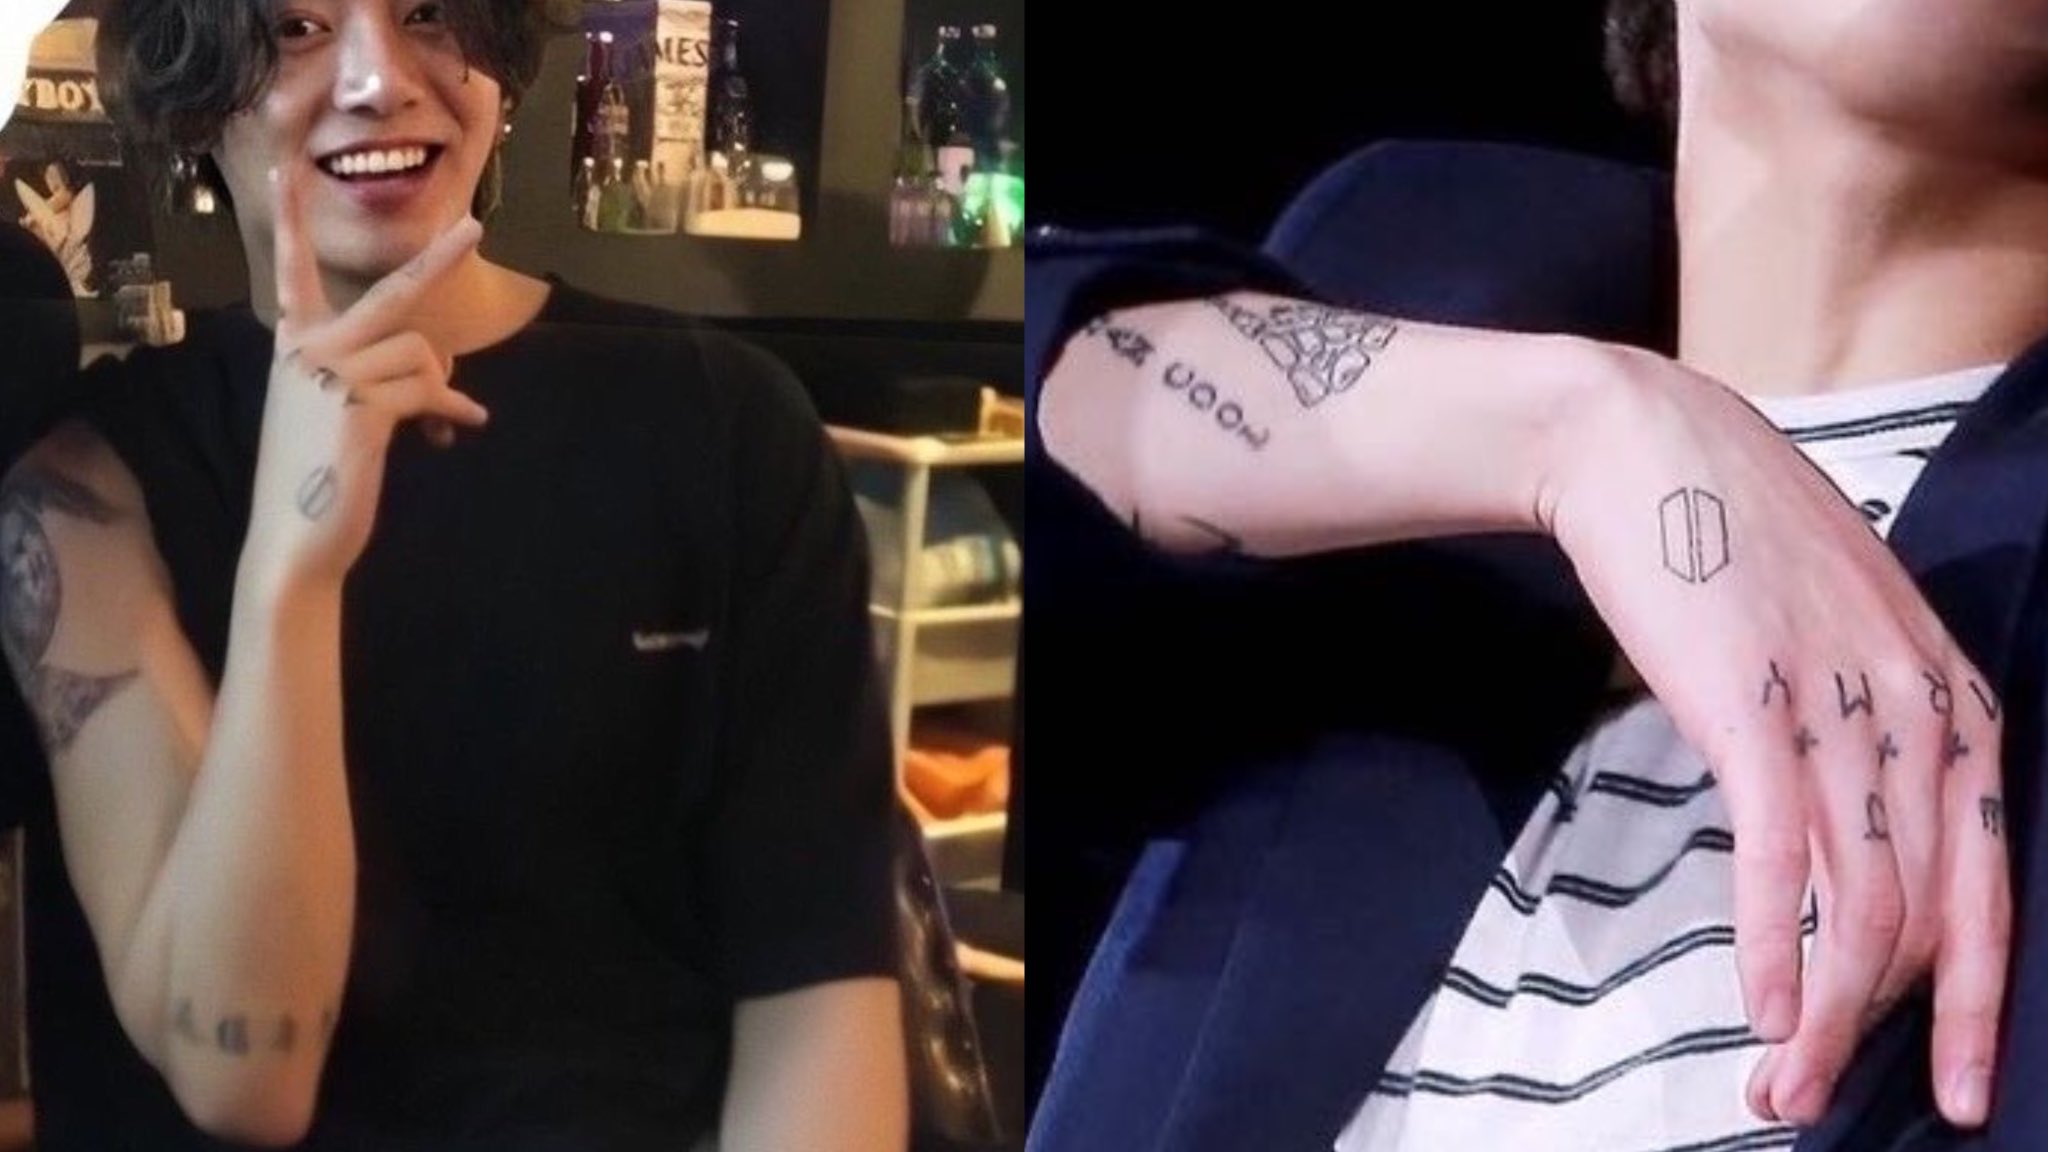 Here Are The Meanings Behind BTS Jungkook's Arm Tattoos